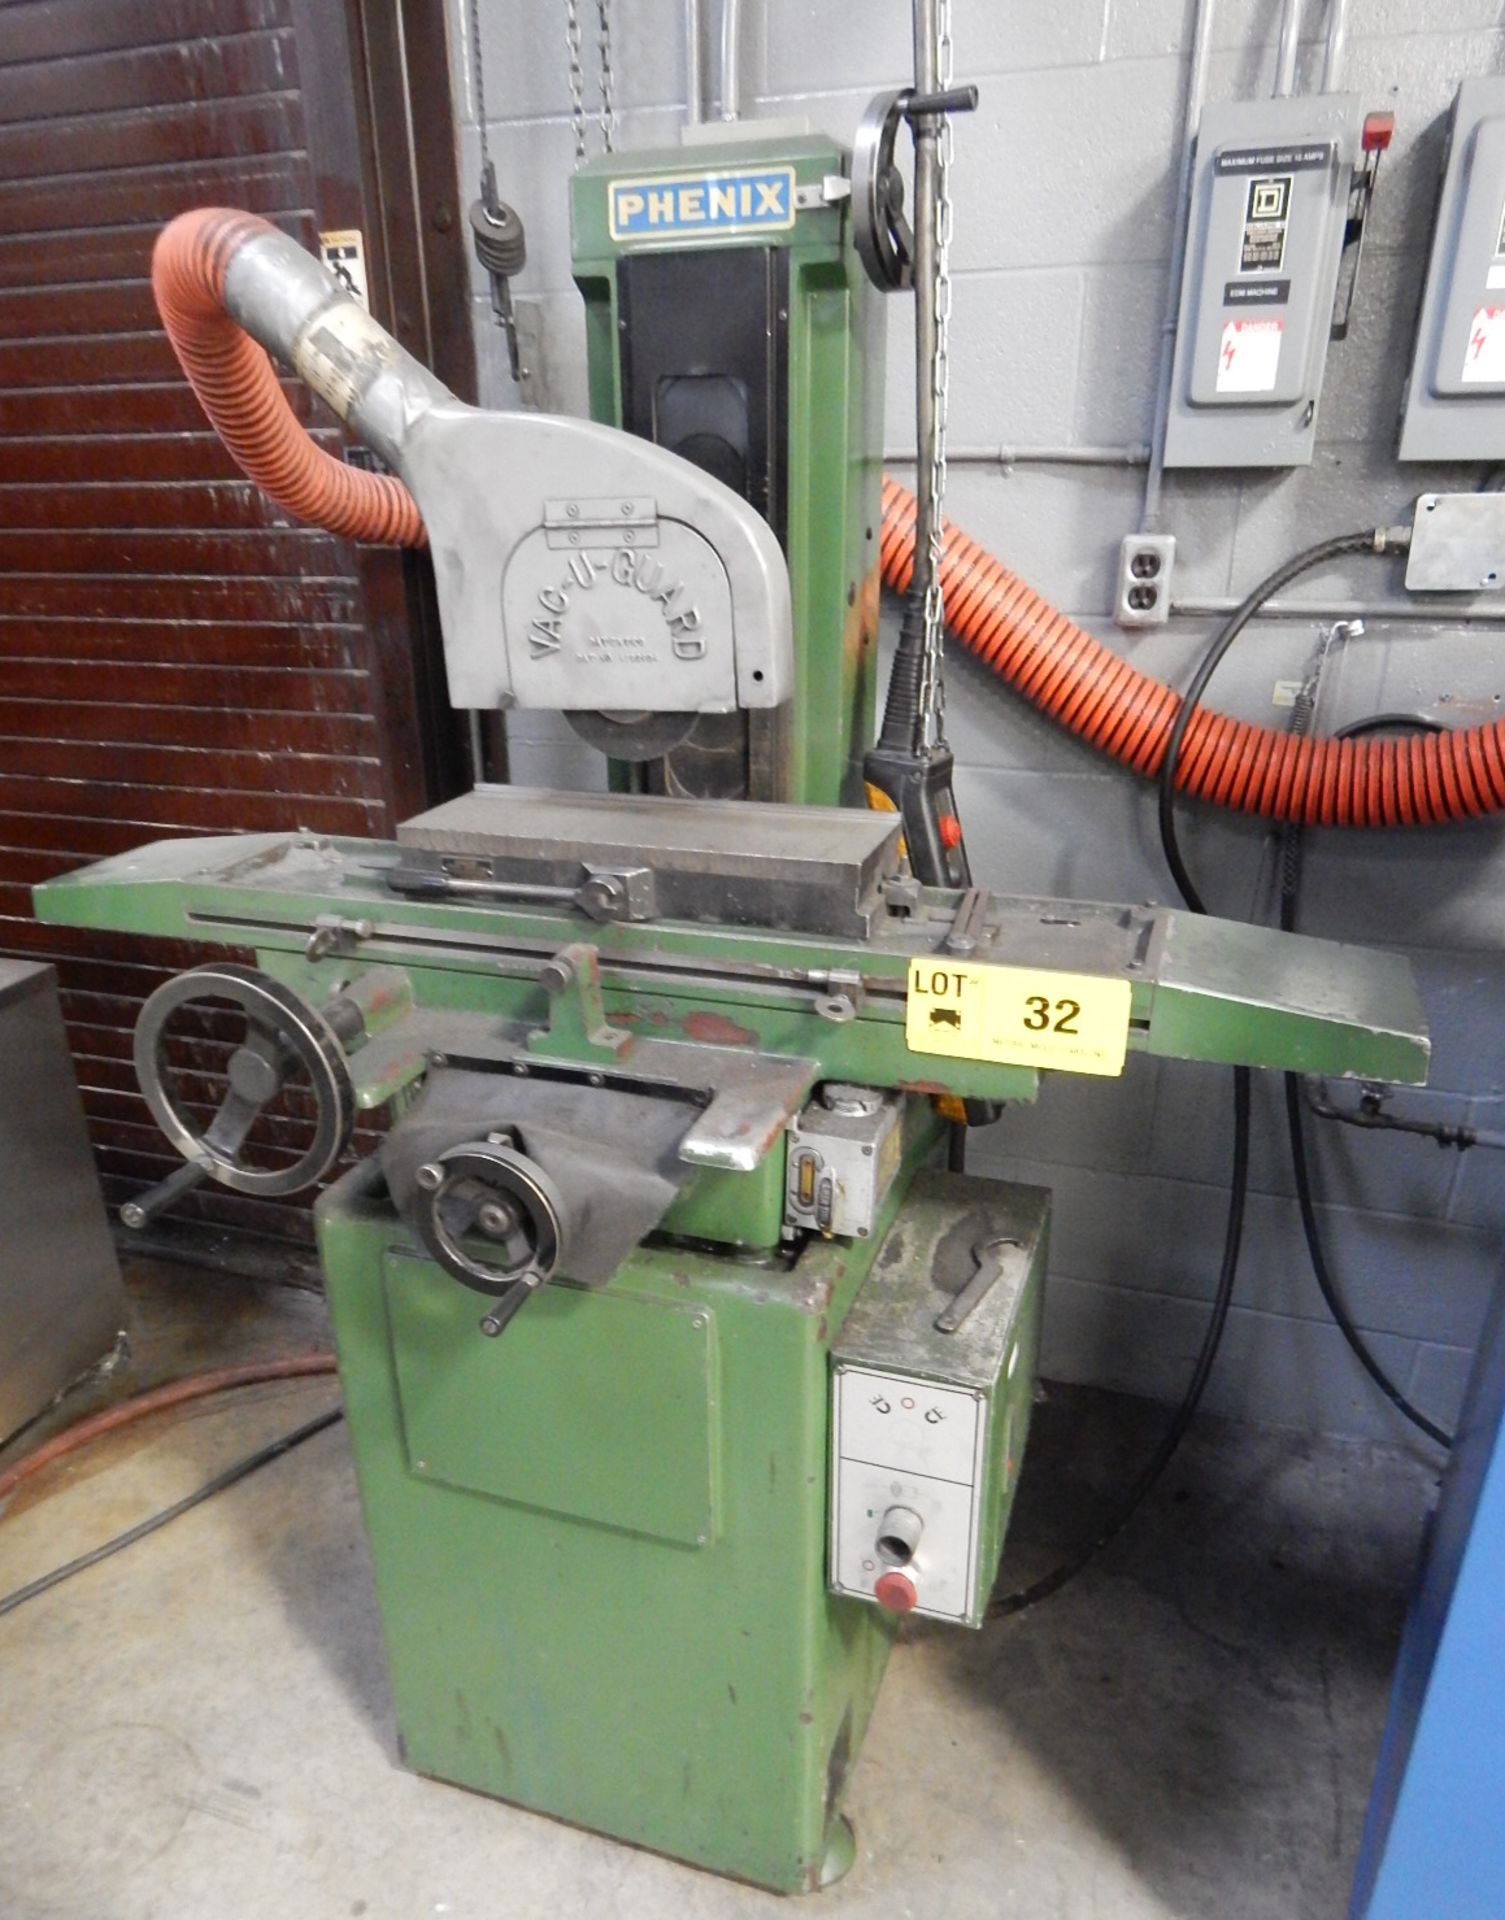 PHENIX SGS-618P MANUAL SURFACE GRINDER WITH 6"X18" MAGNETIC CHUCK, S/N: 86M2B078 (CI)